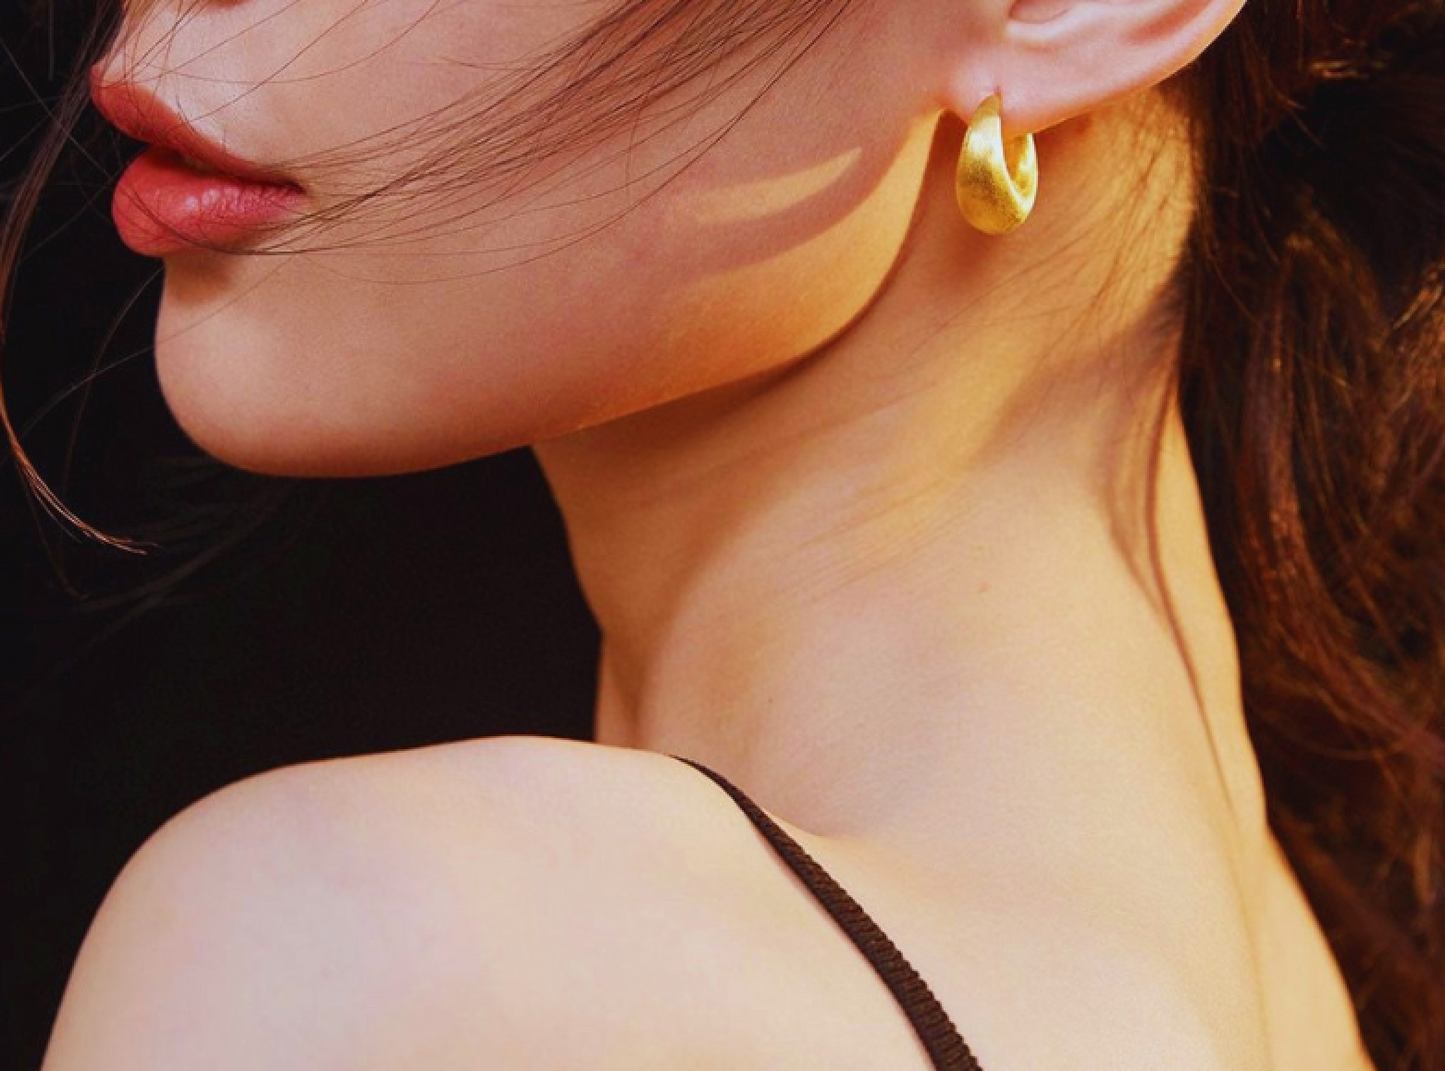 Golden Hoop Earrings - Timeless and elegant fashion accessories for women. Lightweight with secure latch back closure. Perfect for any occasion.